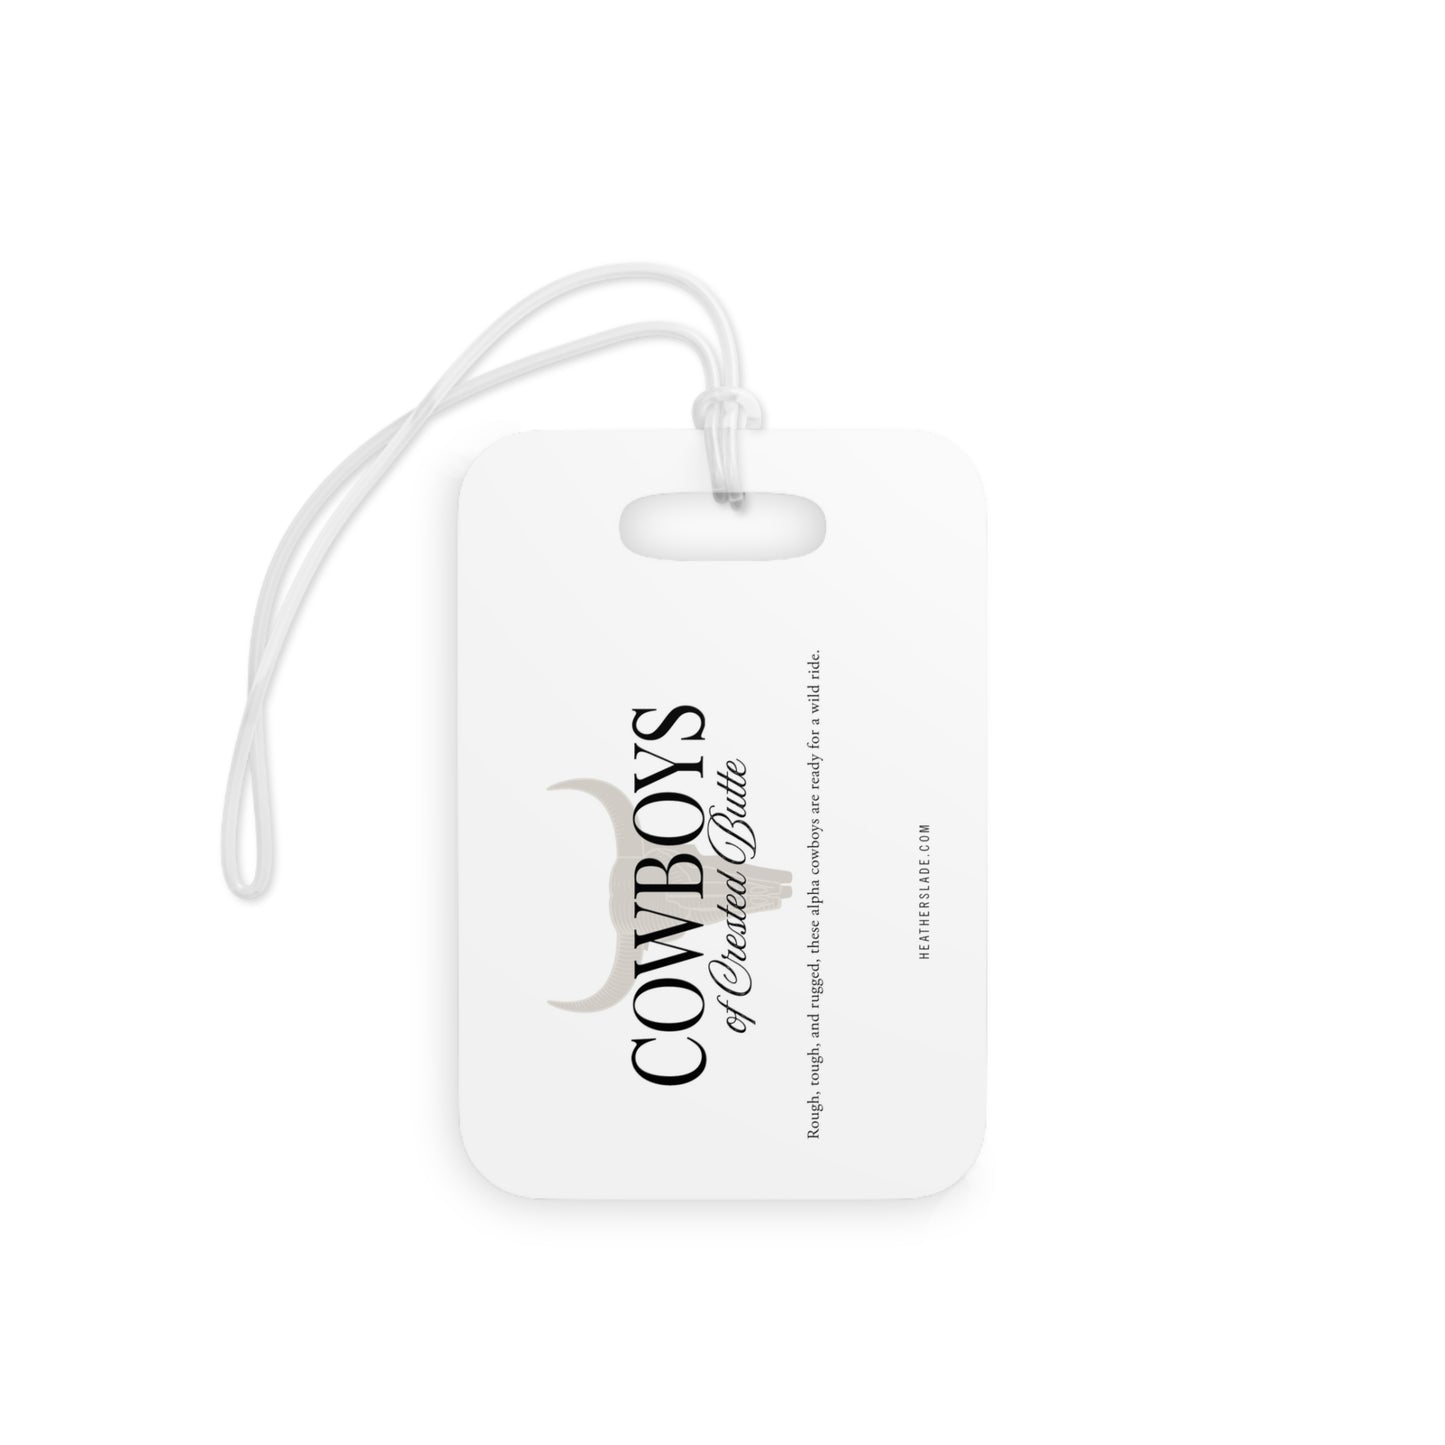 Cowboys of Crested Butte Luggage Tags